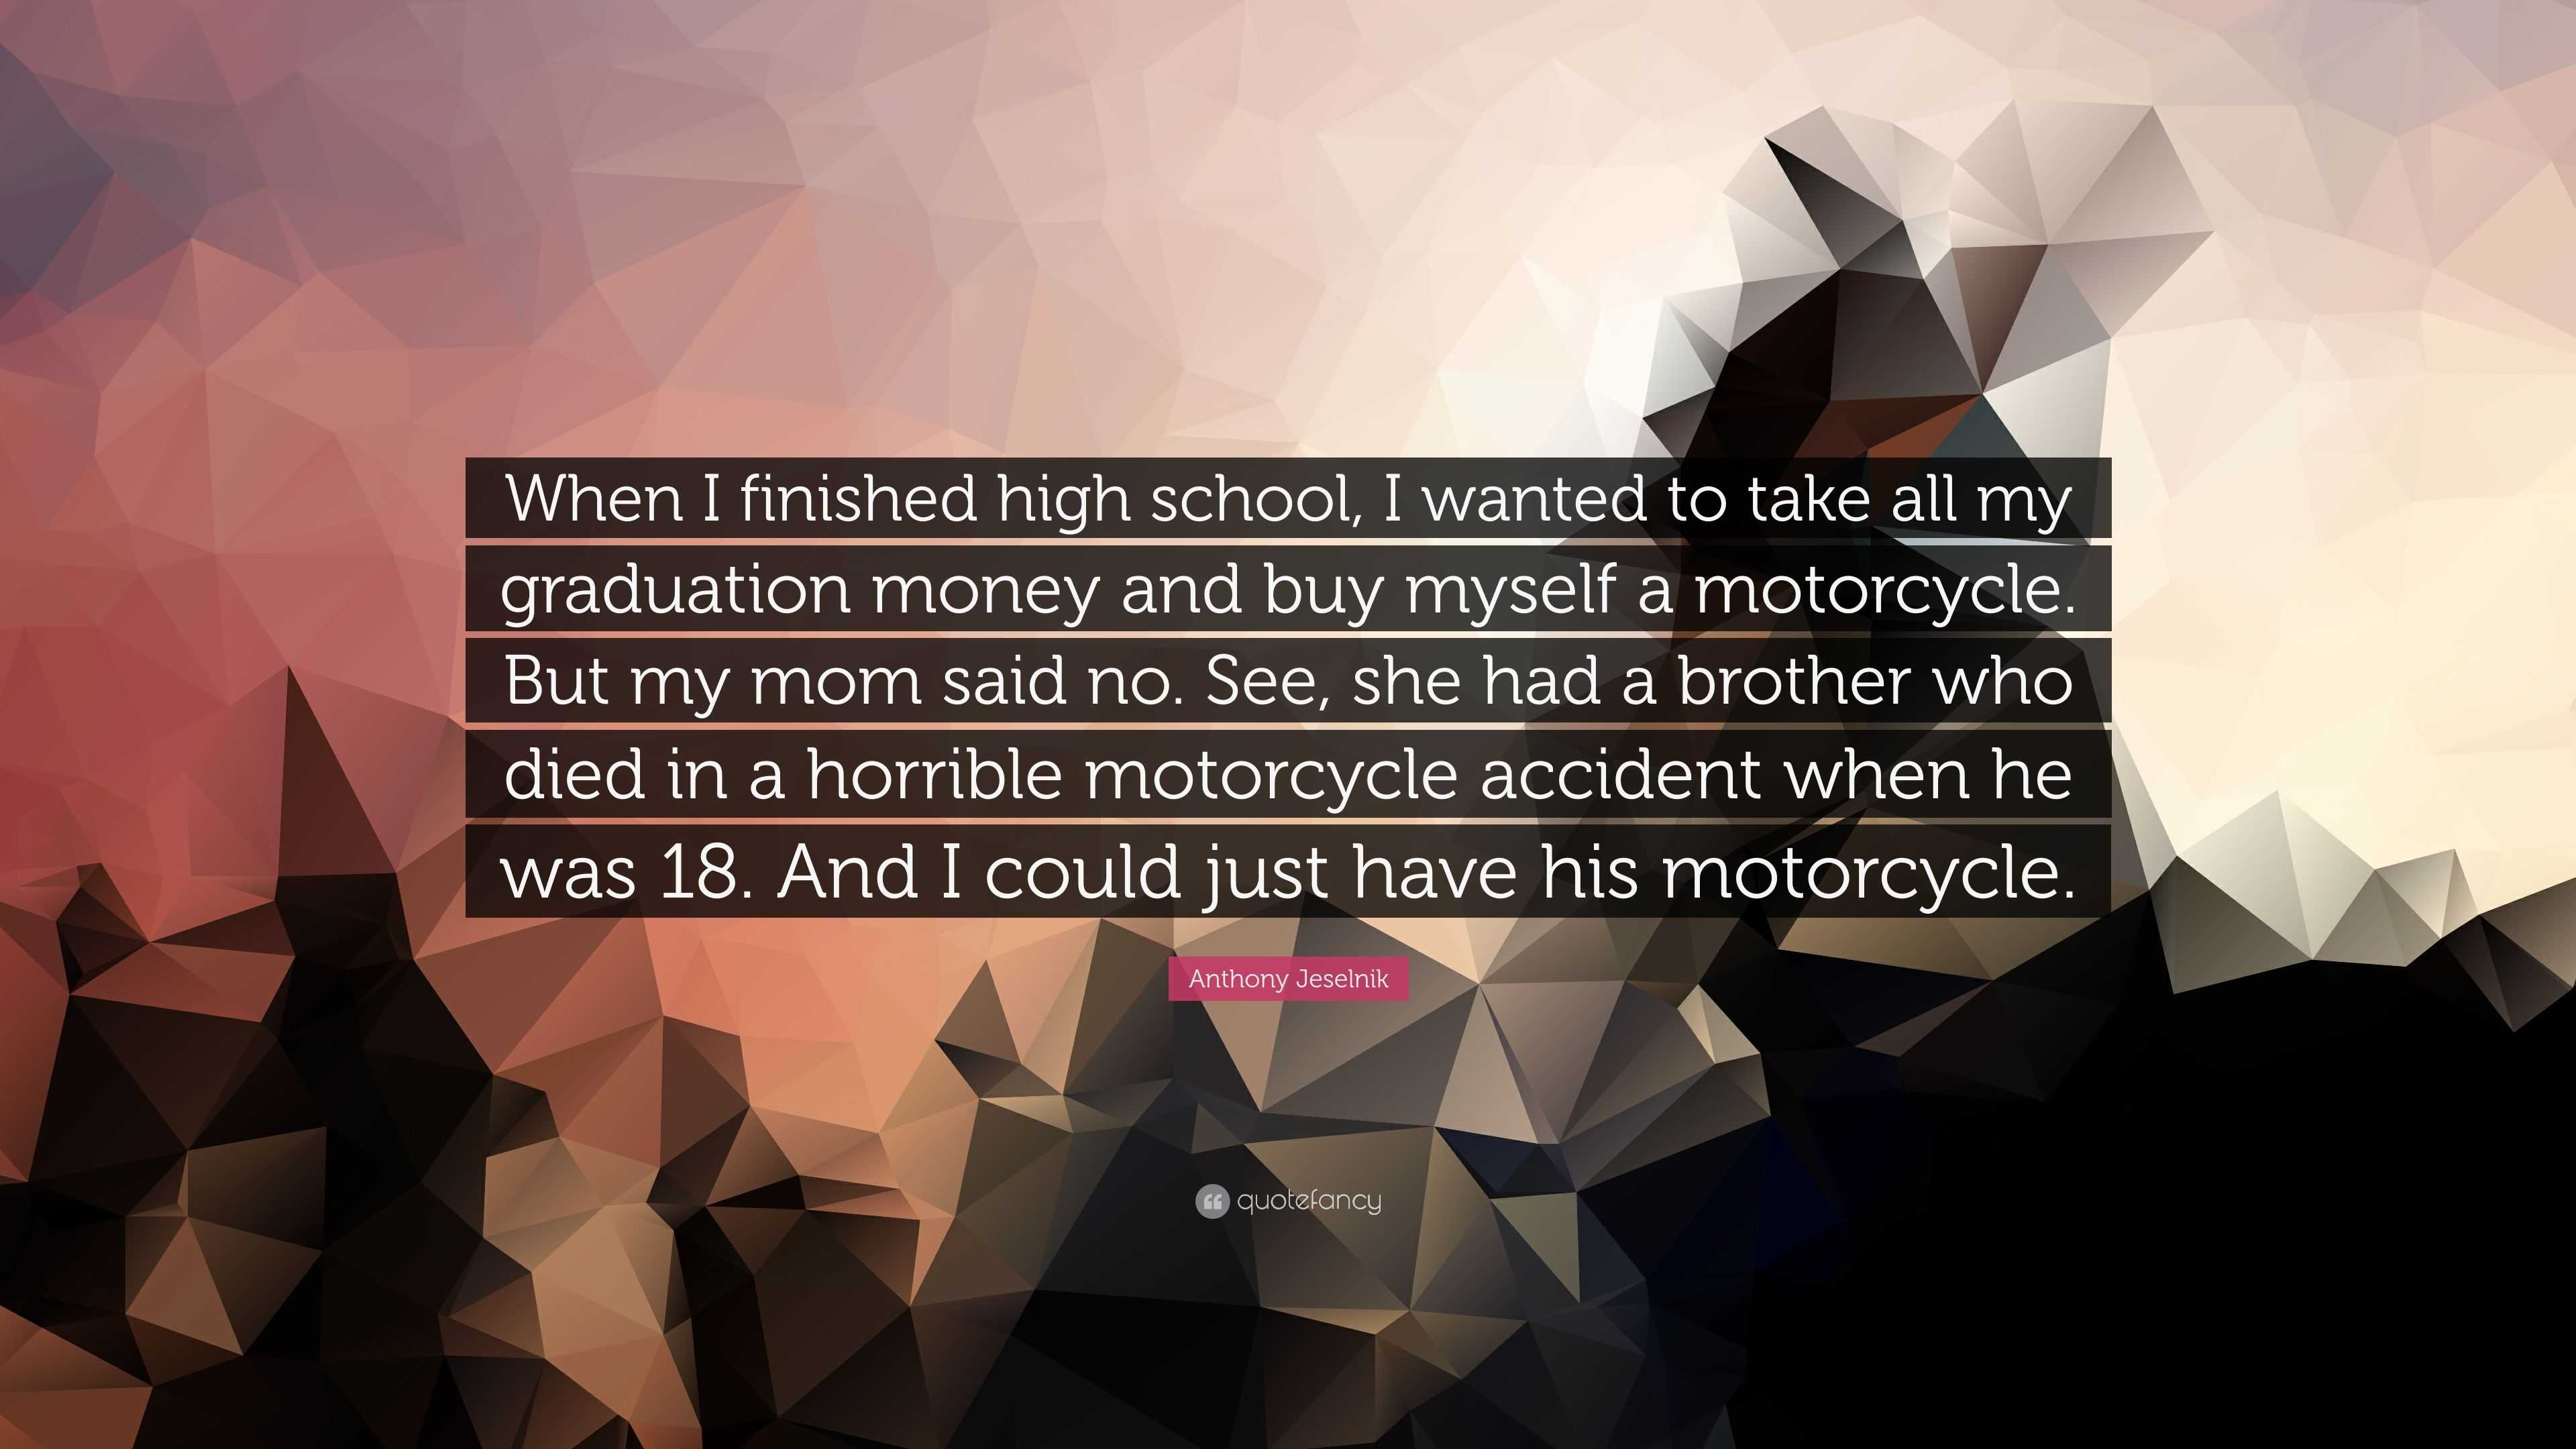 Anthony Jeselnik Quote: “When I finished high school, I wanted to take all  my graduation money and buy myself a motorcycle. But my mom said no. S”